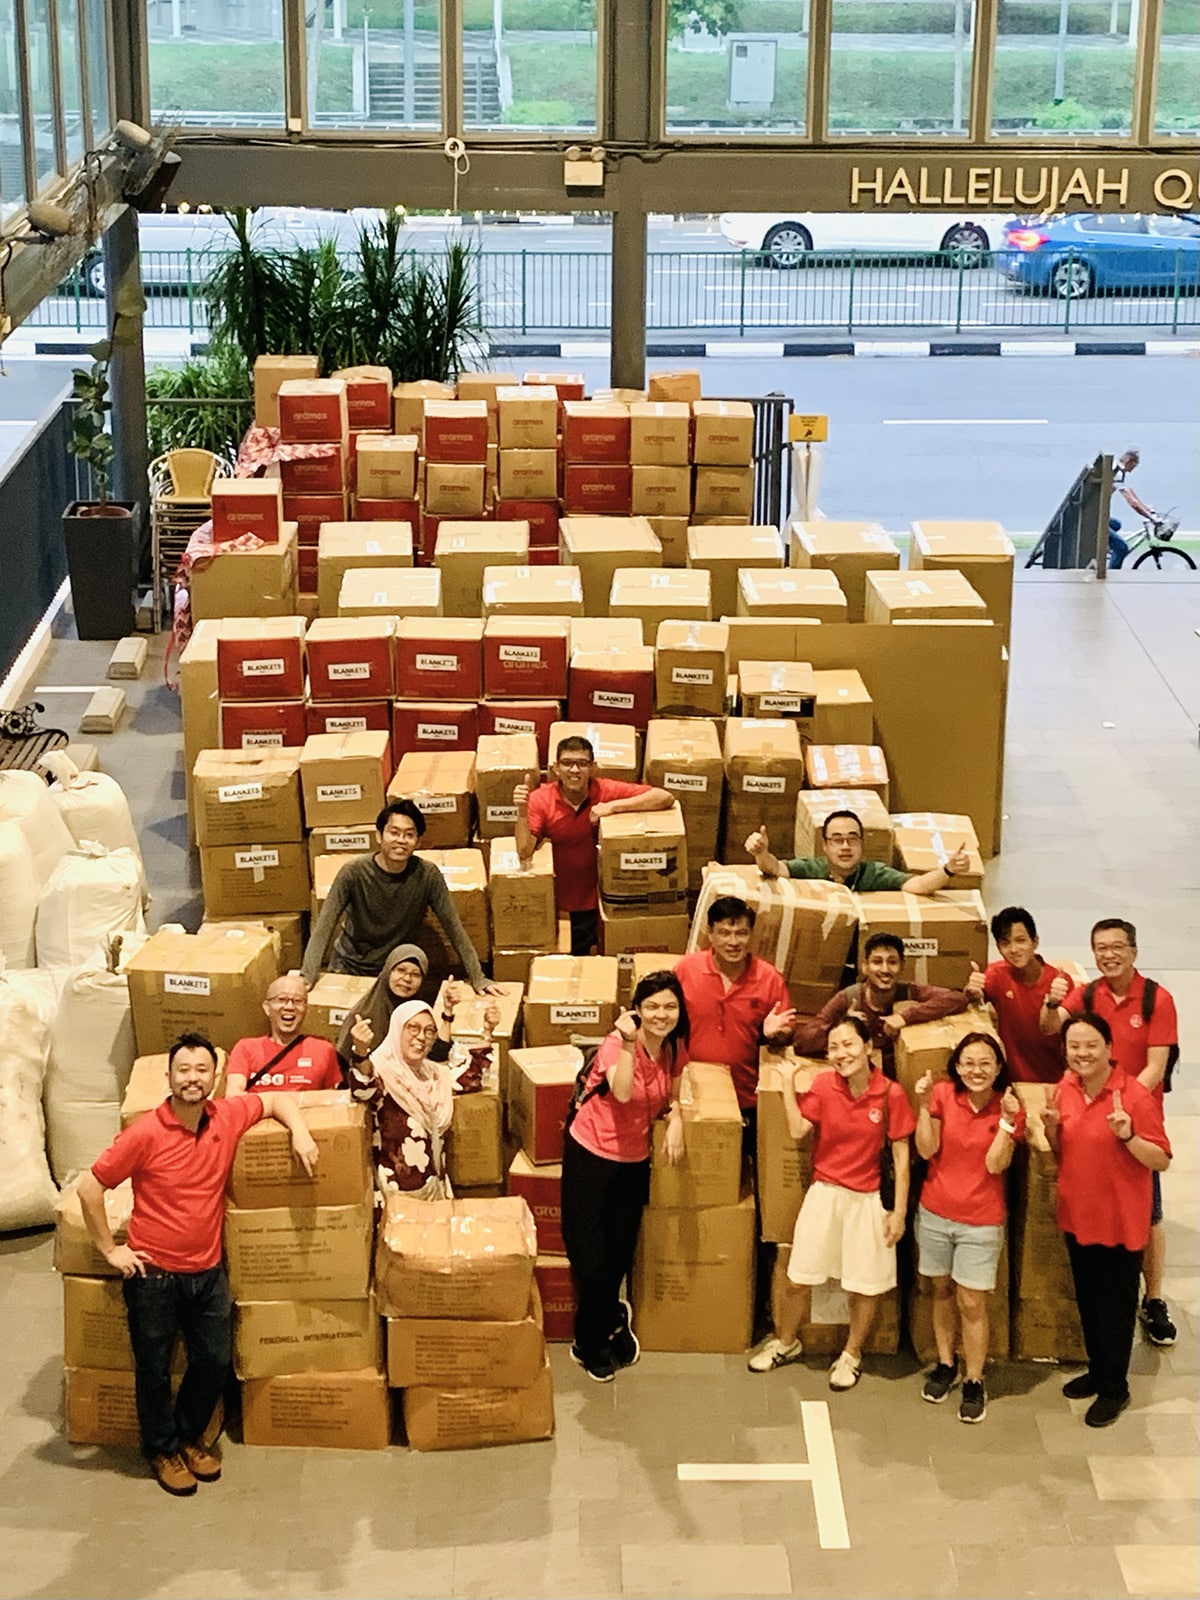 Members of Relief Singapore, Bethesda Bedok Tampines Church, and volunteers at the Gaza blankets donation drive with the almost 2,500 blankets collected on Nov 11-12.